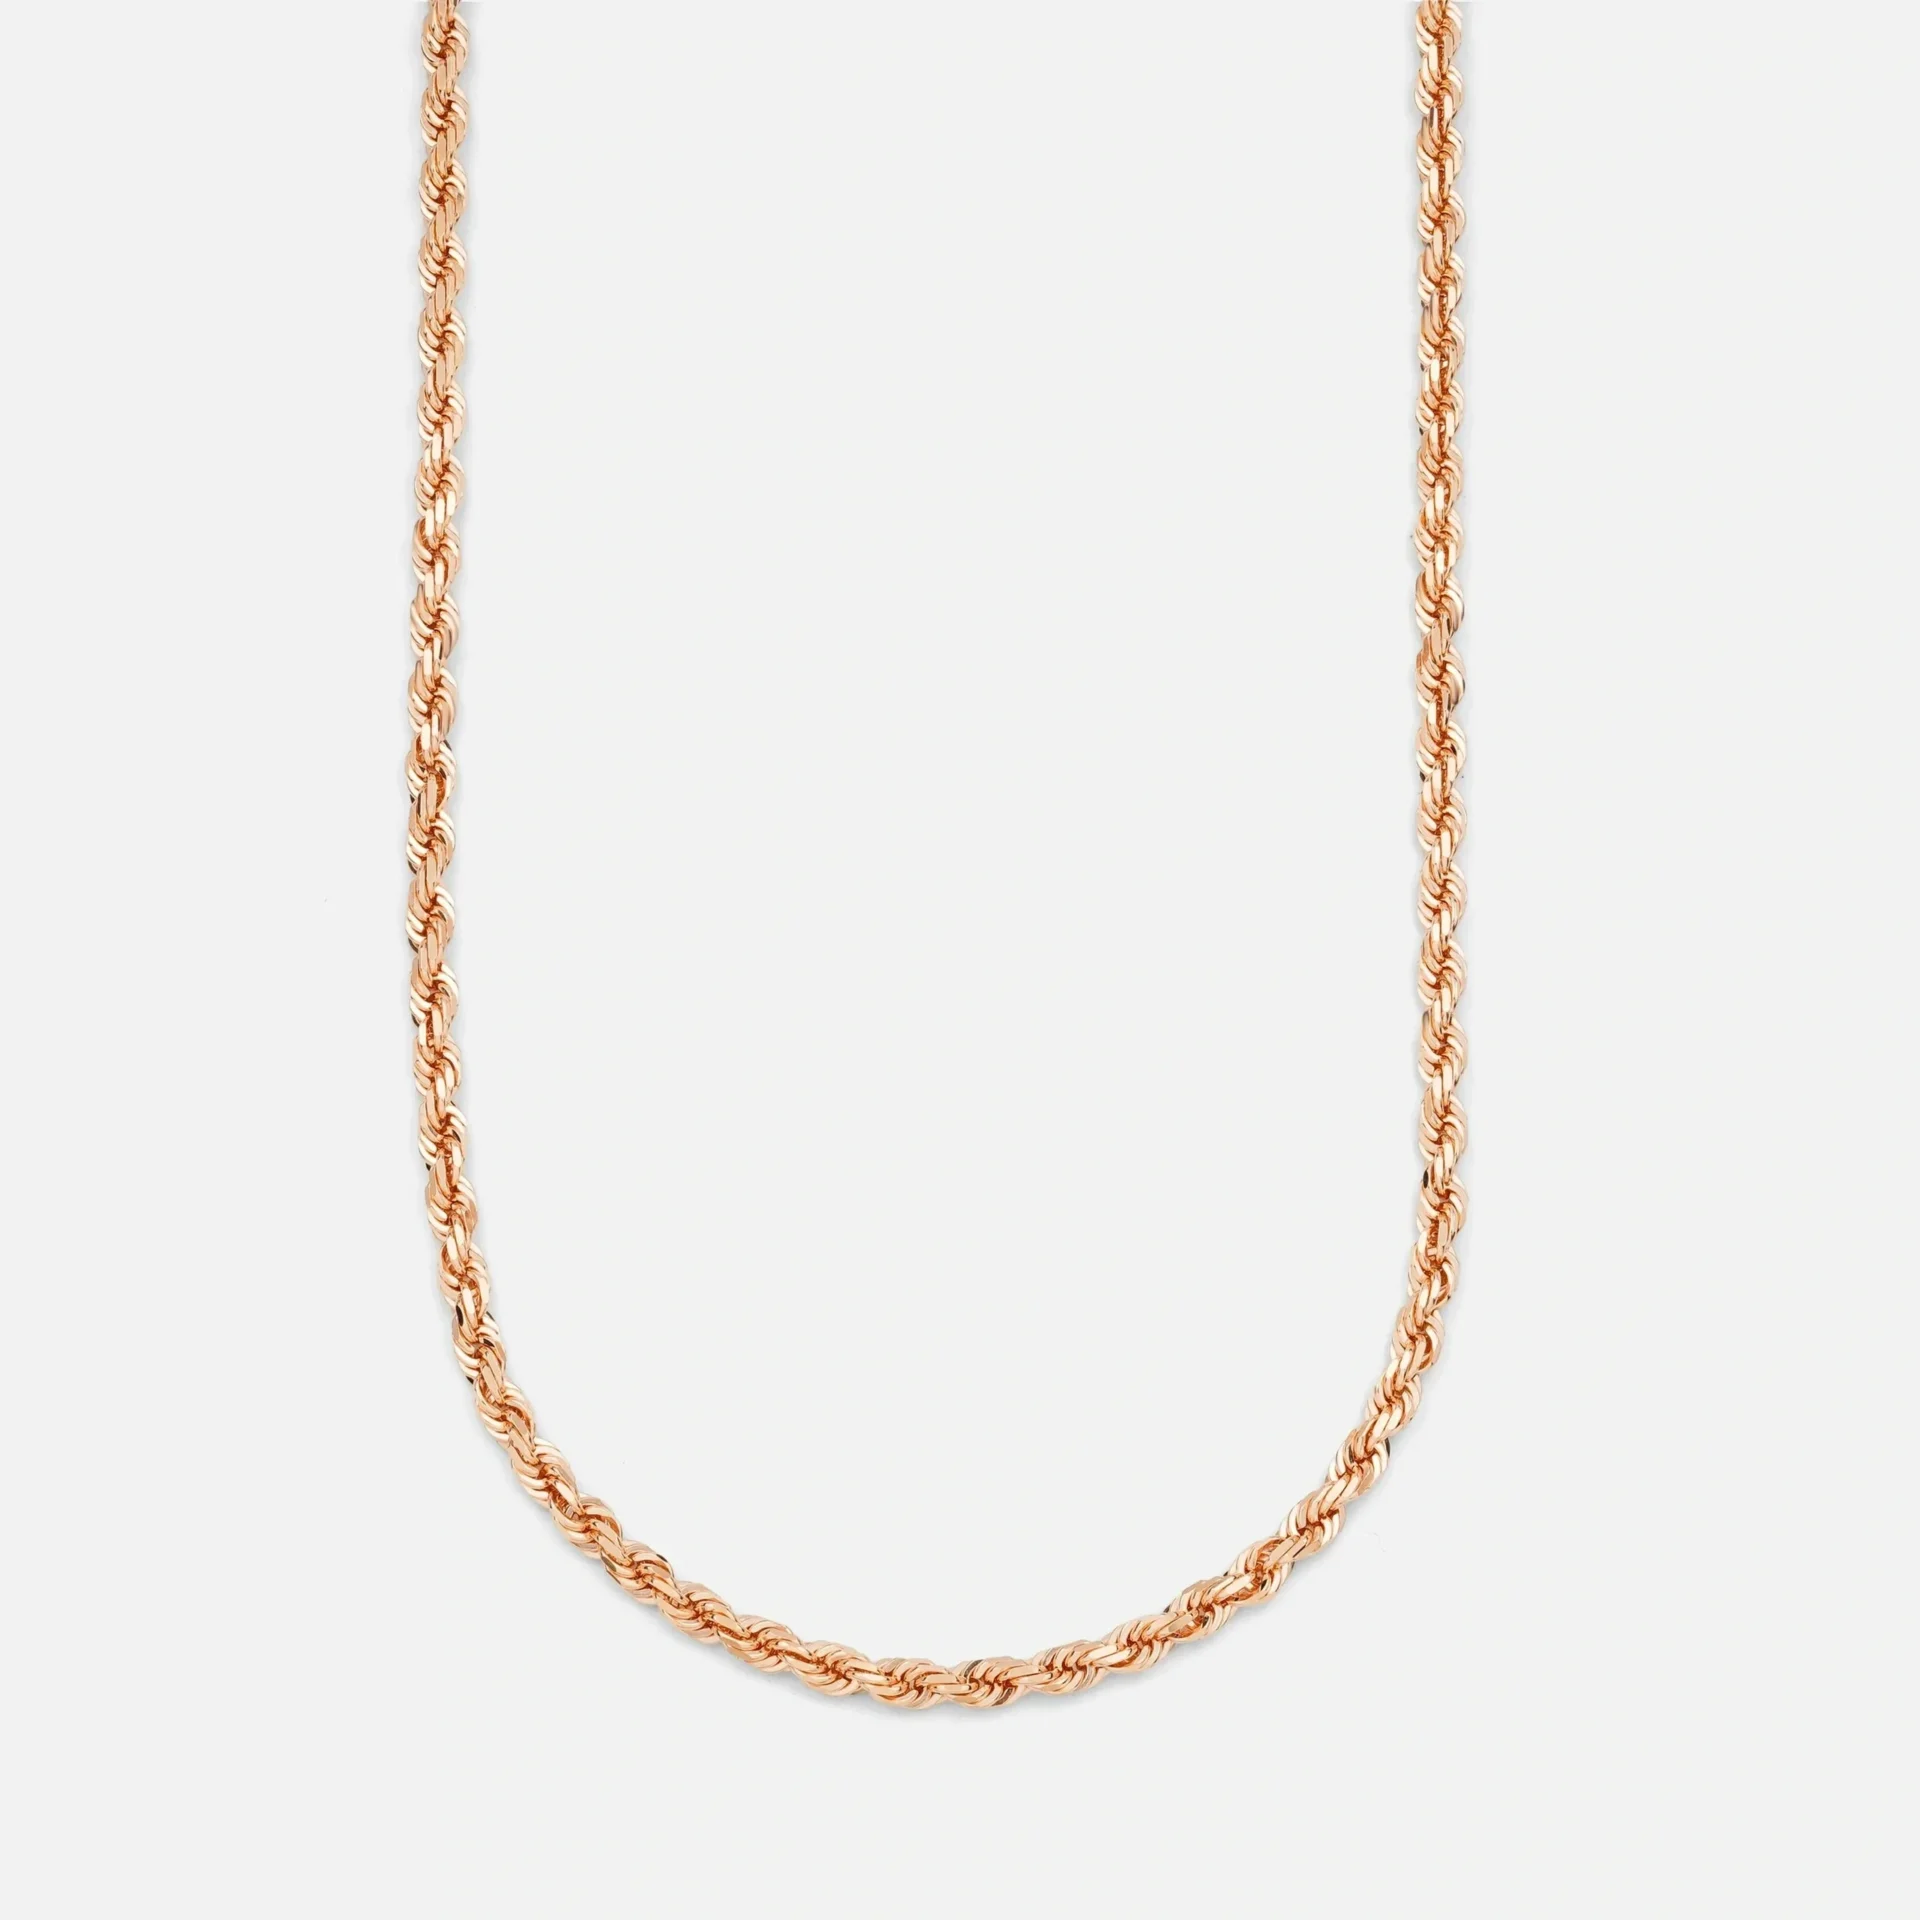 A gold chain necklace is shown on a white background.